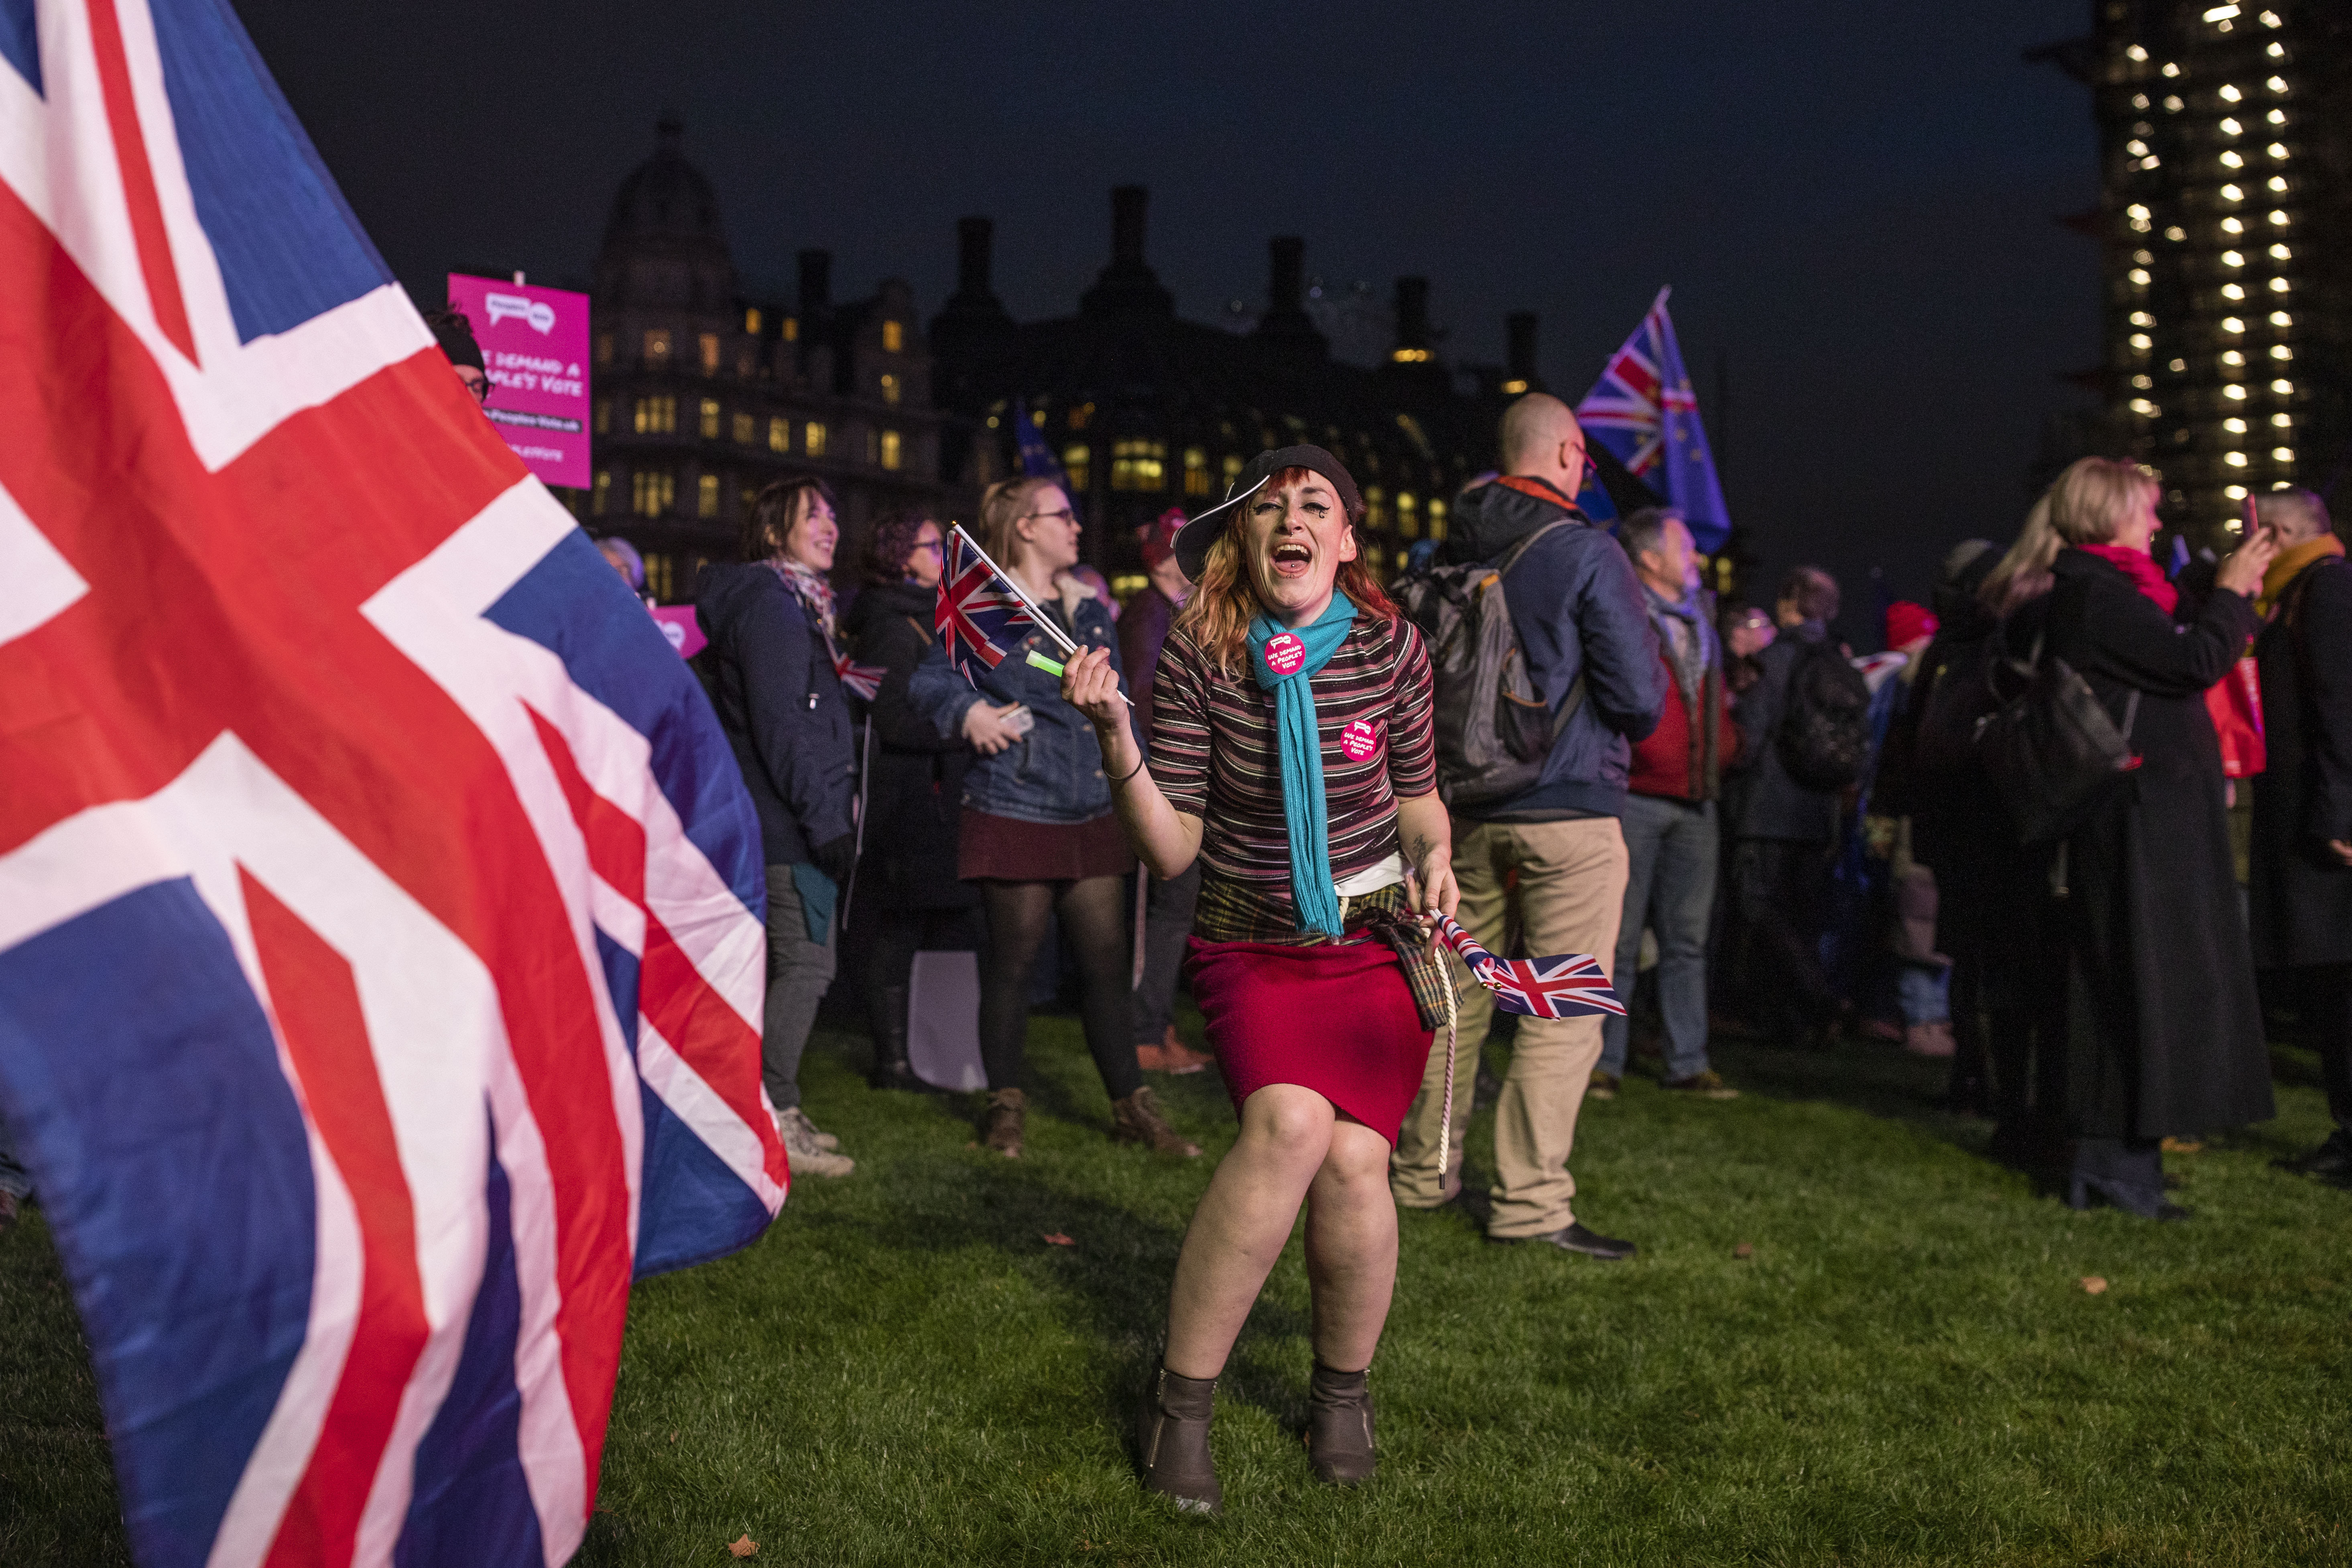 'People's Vote' supporters dance and listen to speeches during a demonstration in Parliament Square on January 15, 2019 in London, England. (Photo by Dan Kitwood/Getty Images)